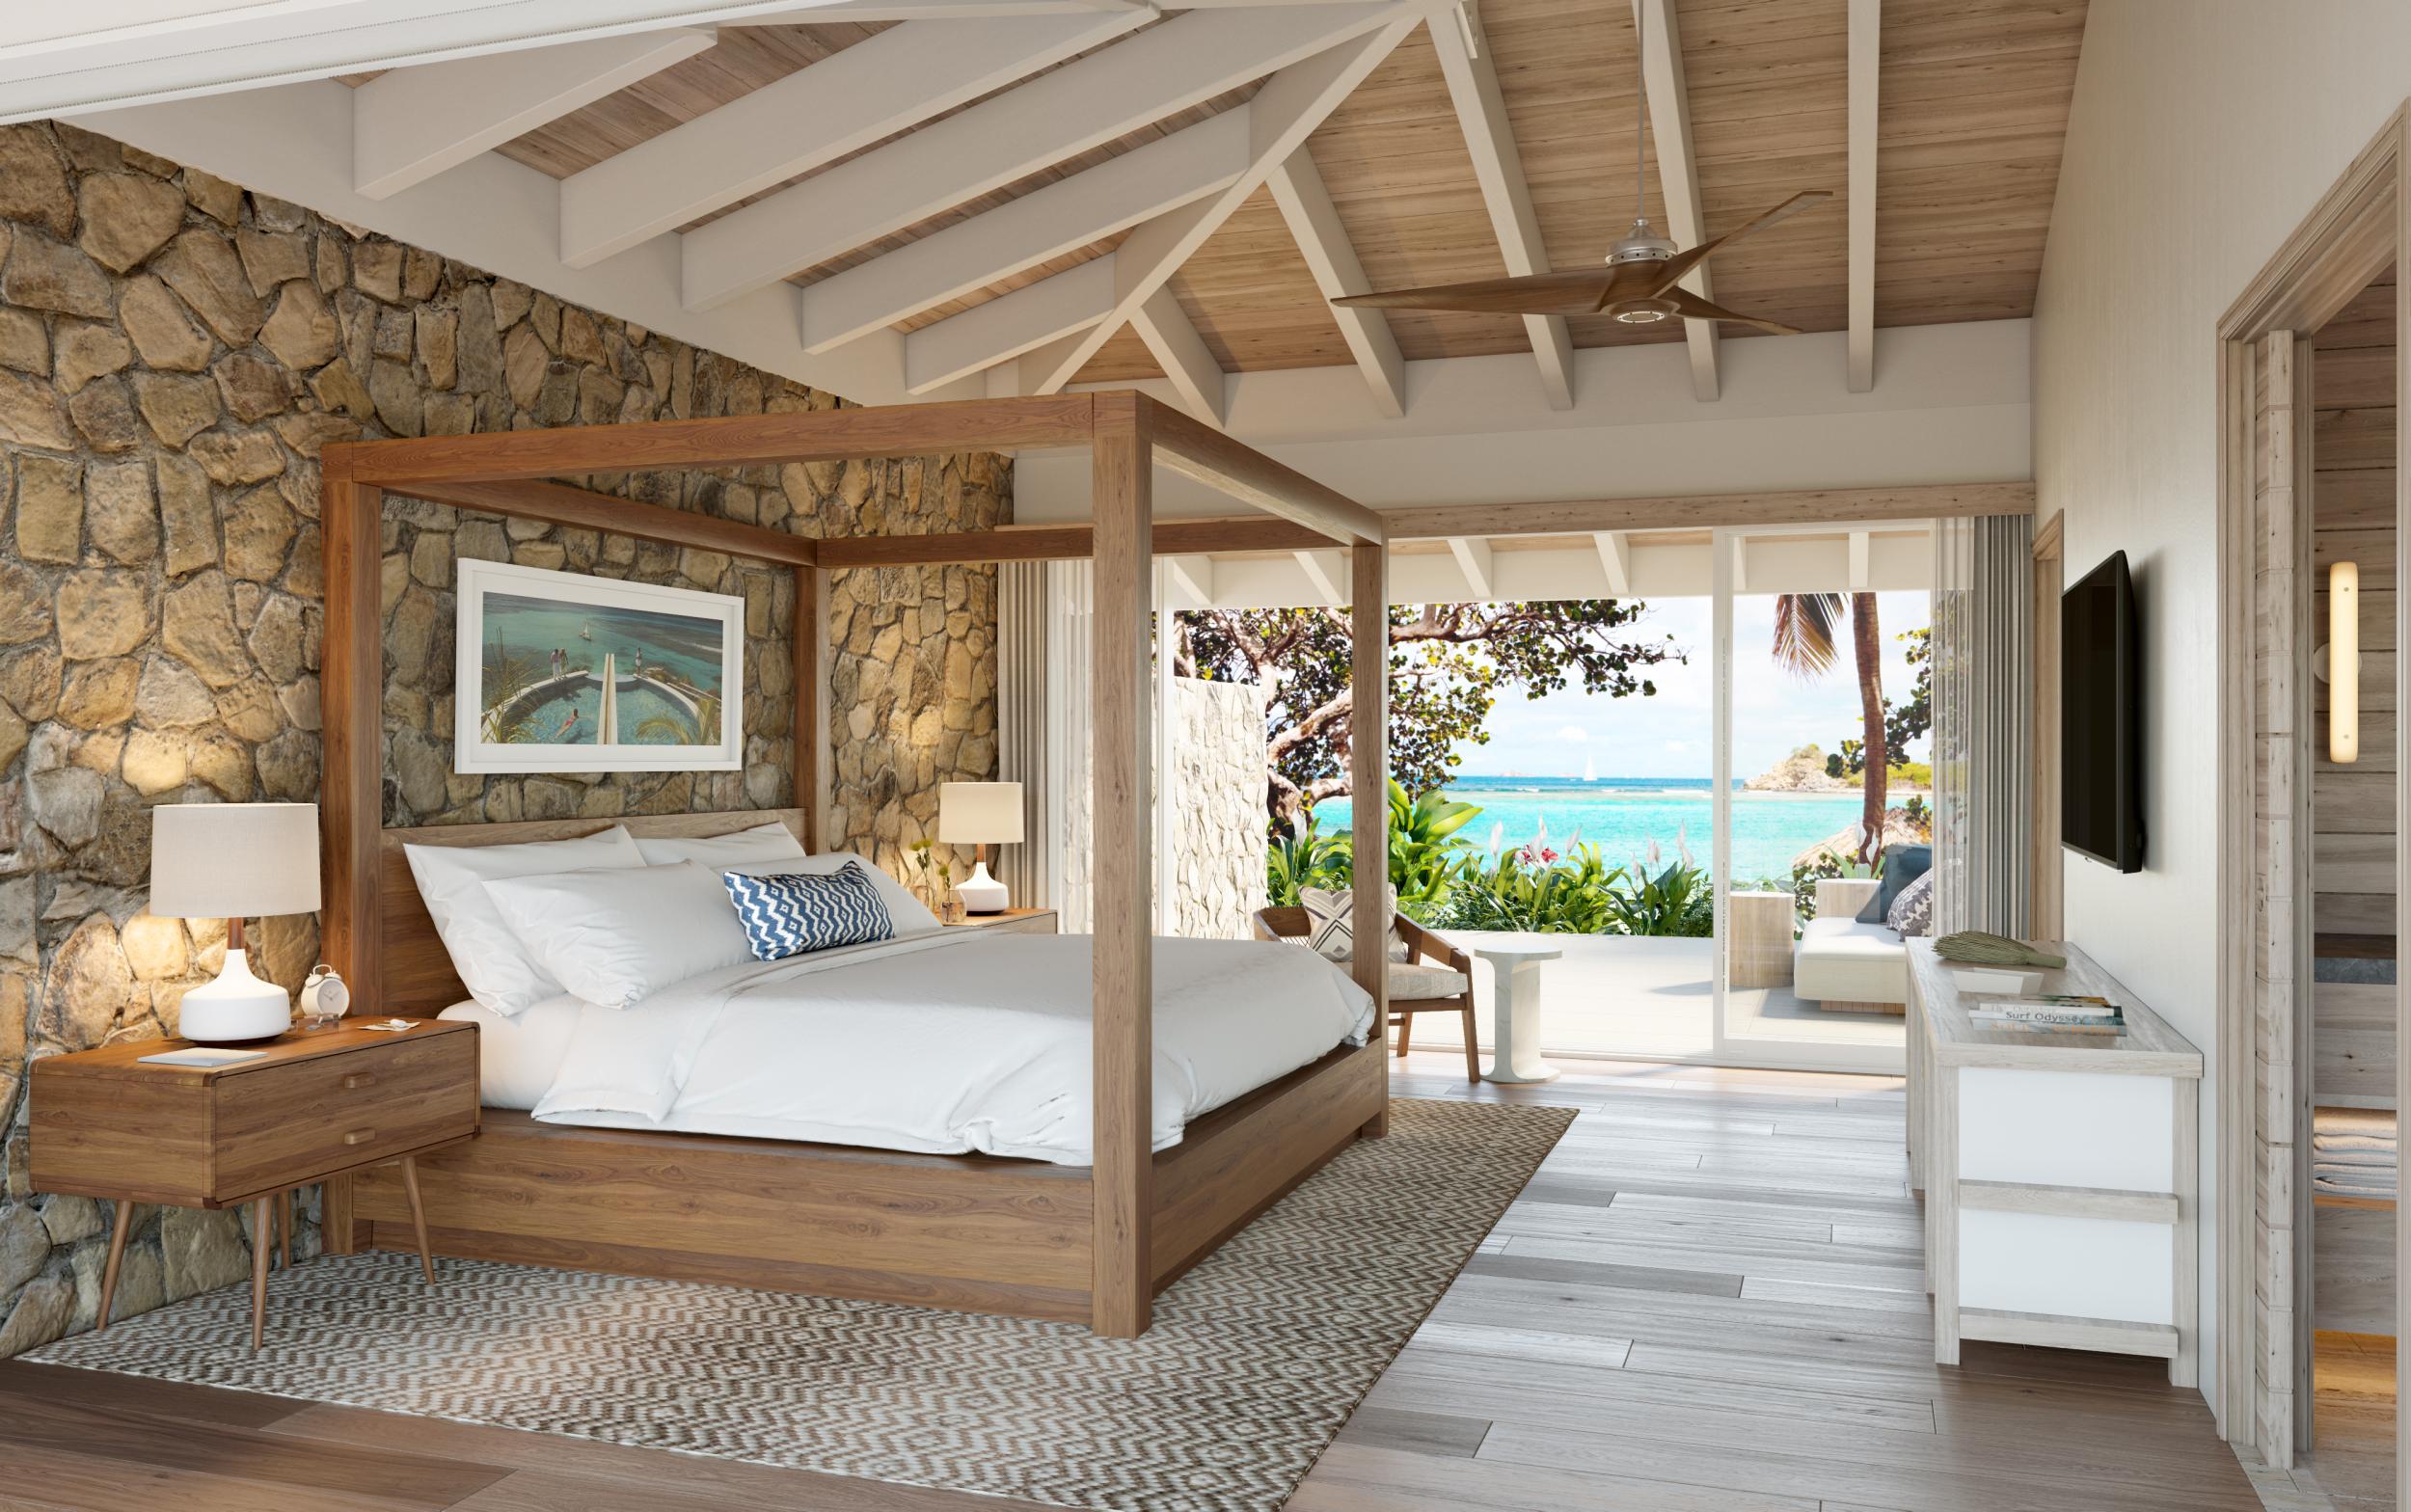 Rosewood Little Dix Bay is reopening following a major refurb